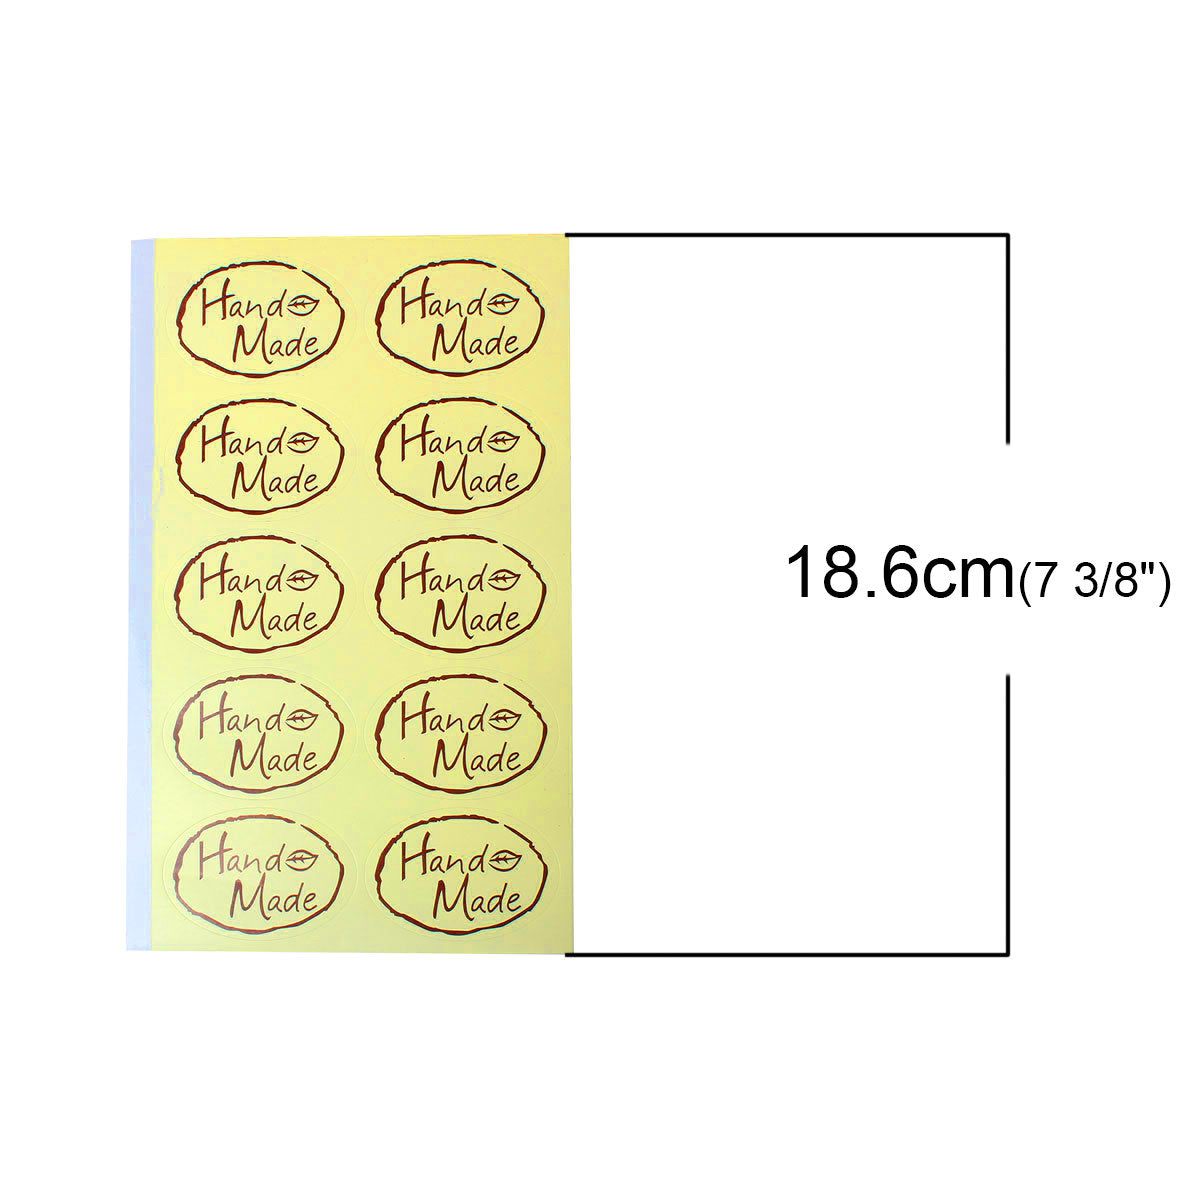 Handmade tags - Set of 20 stickers label